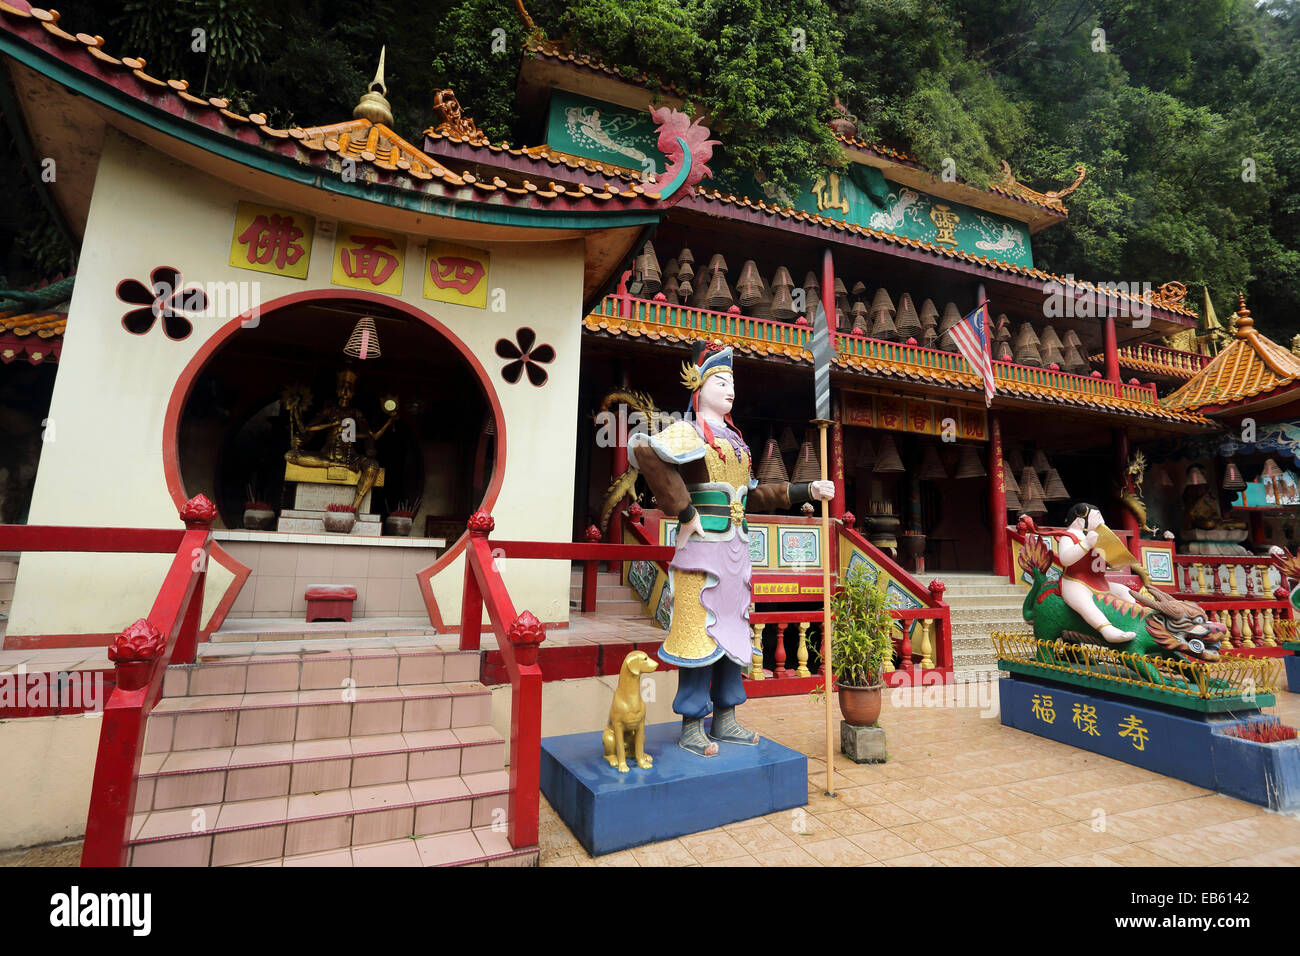 Ling Sen Tong temple near Ipoh, Malaysia. The Taoist temple (aka Sam Poh Tong) continues within limestone caves. Stock Photo